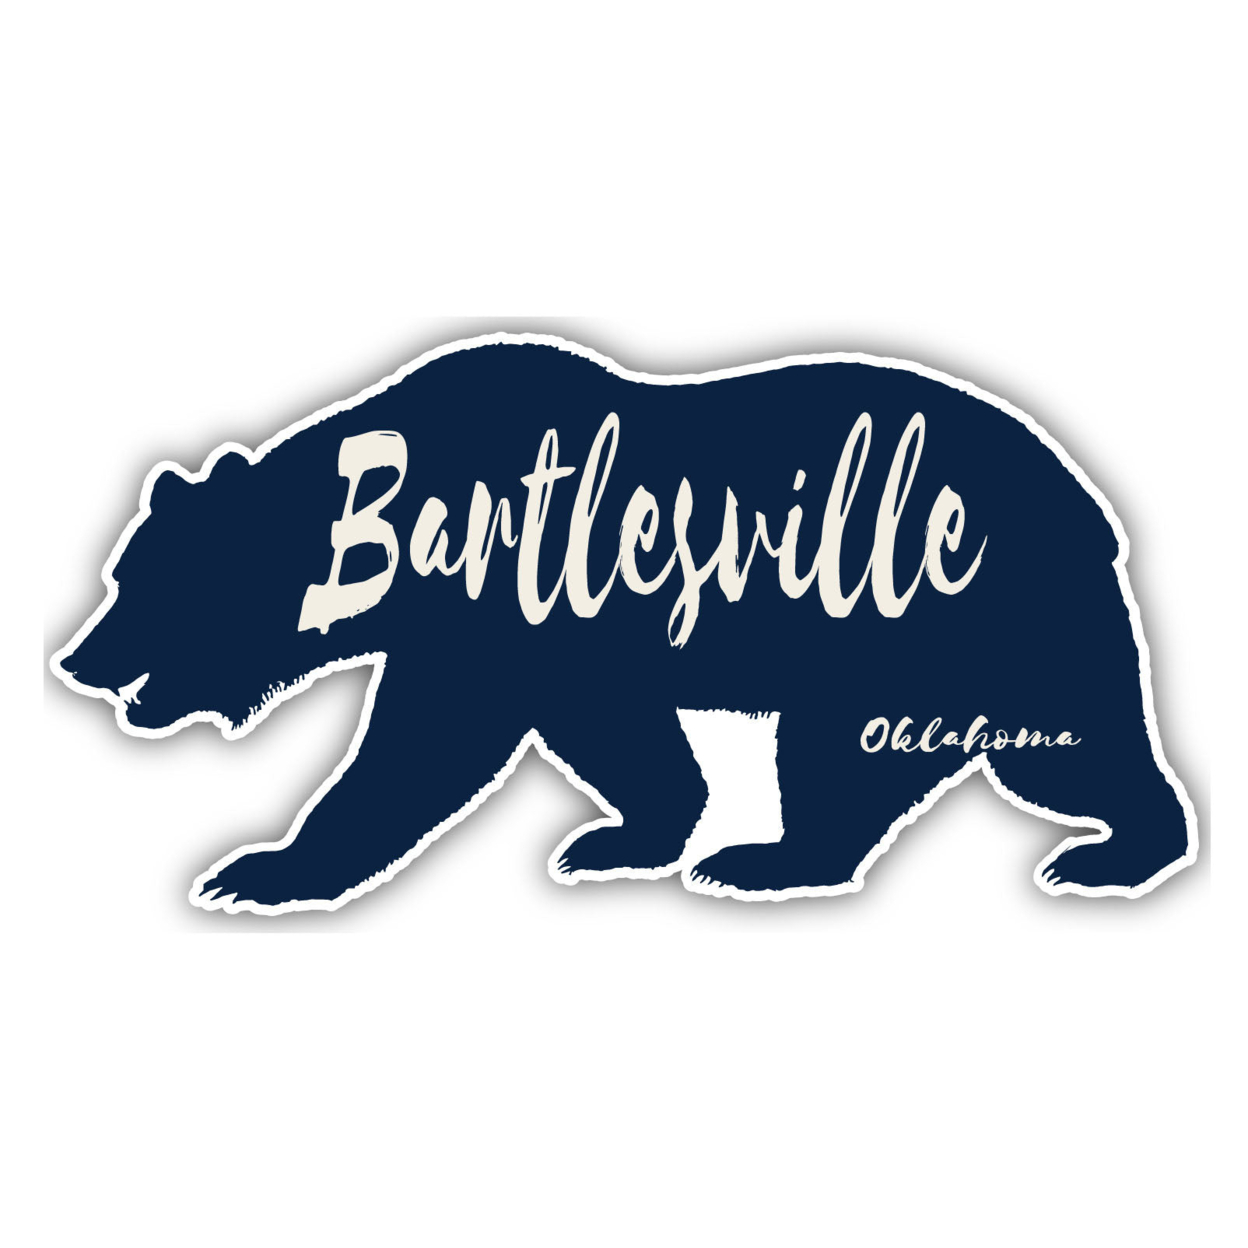 Bartlesville Oklahoma Souvenir Decorative Stickers (Choose Theme And Size) - 4-Pack, 12-Inch, Bear